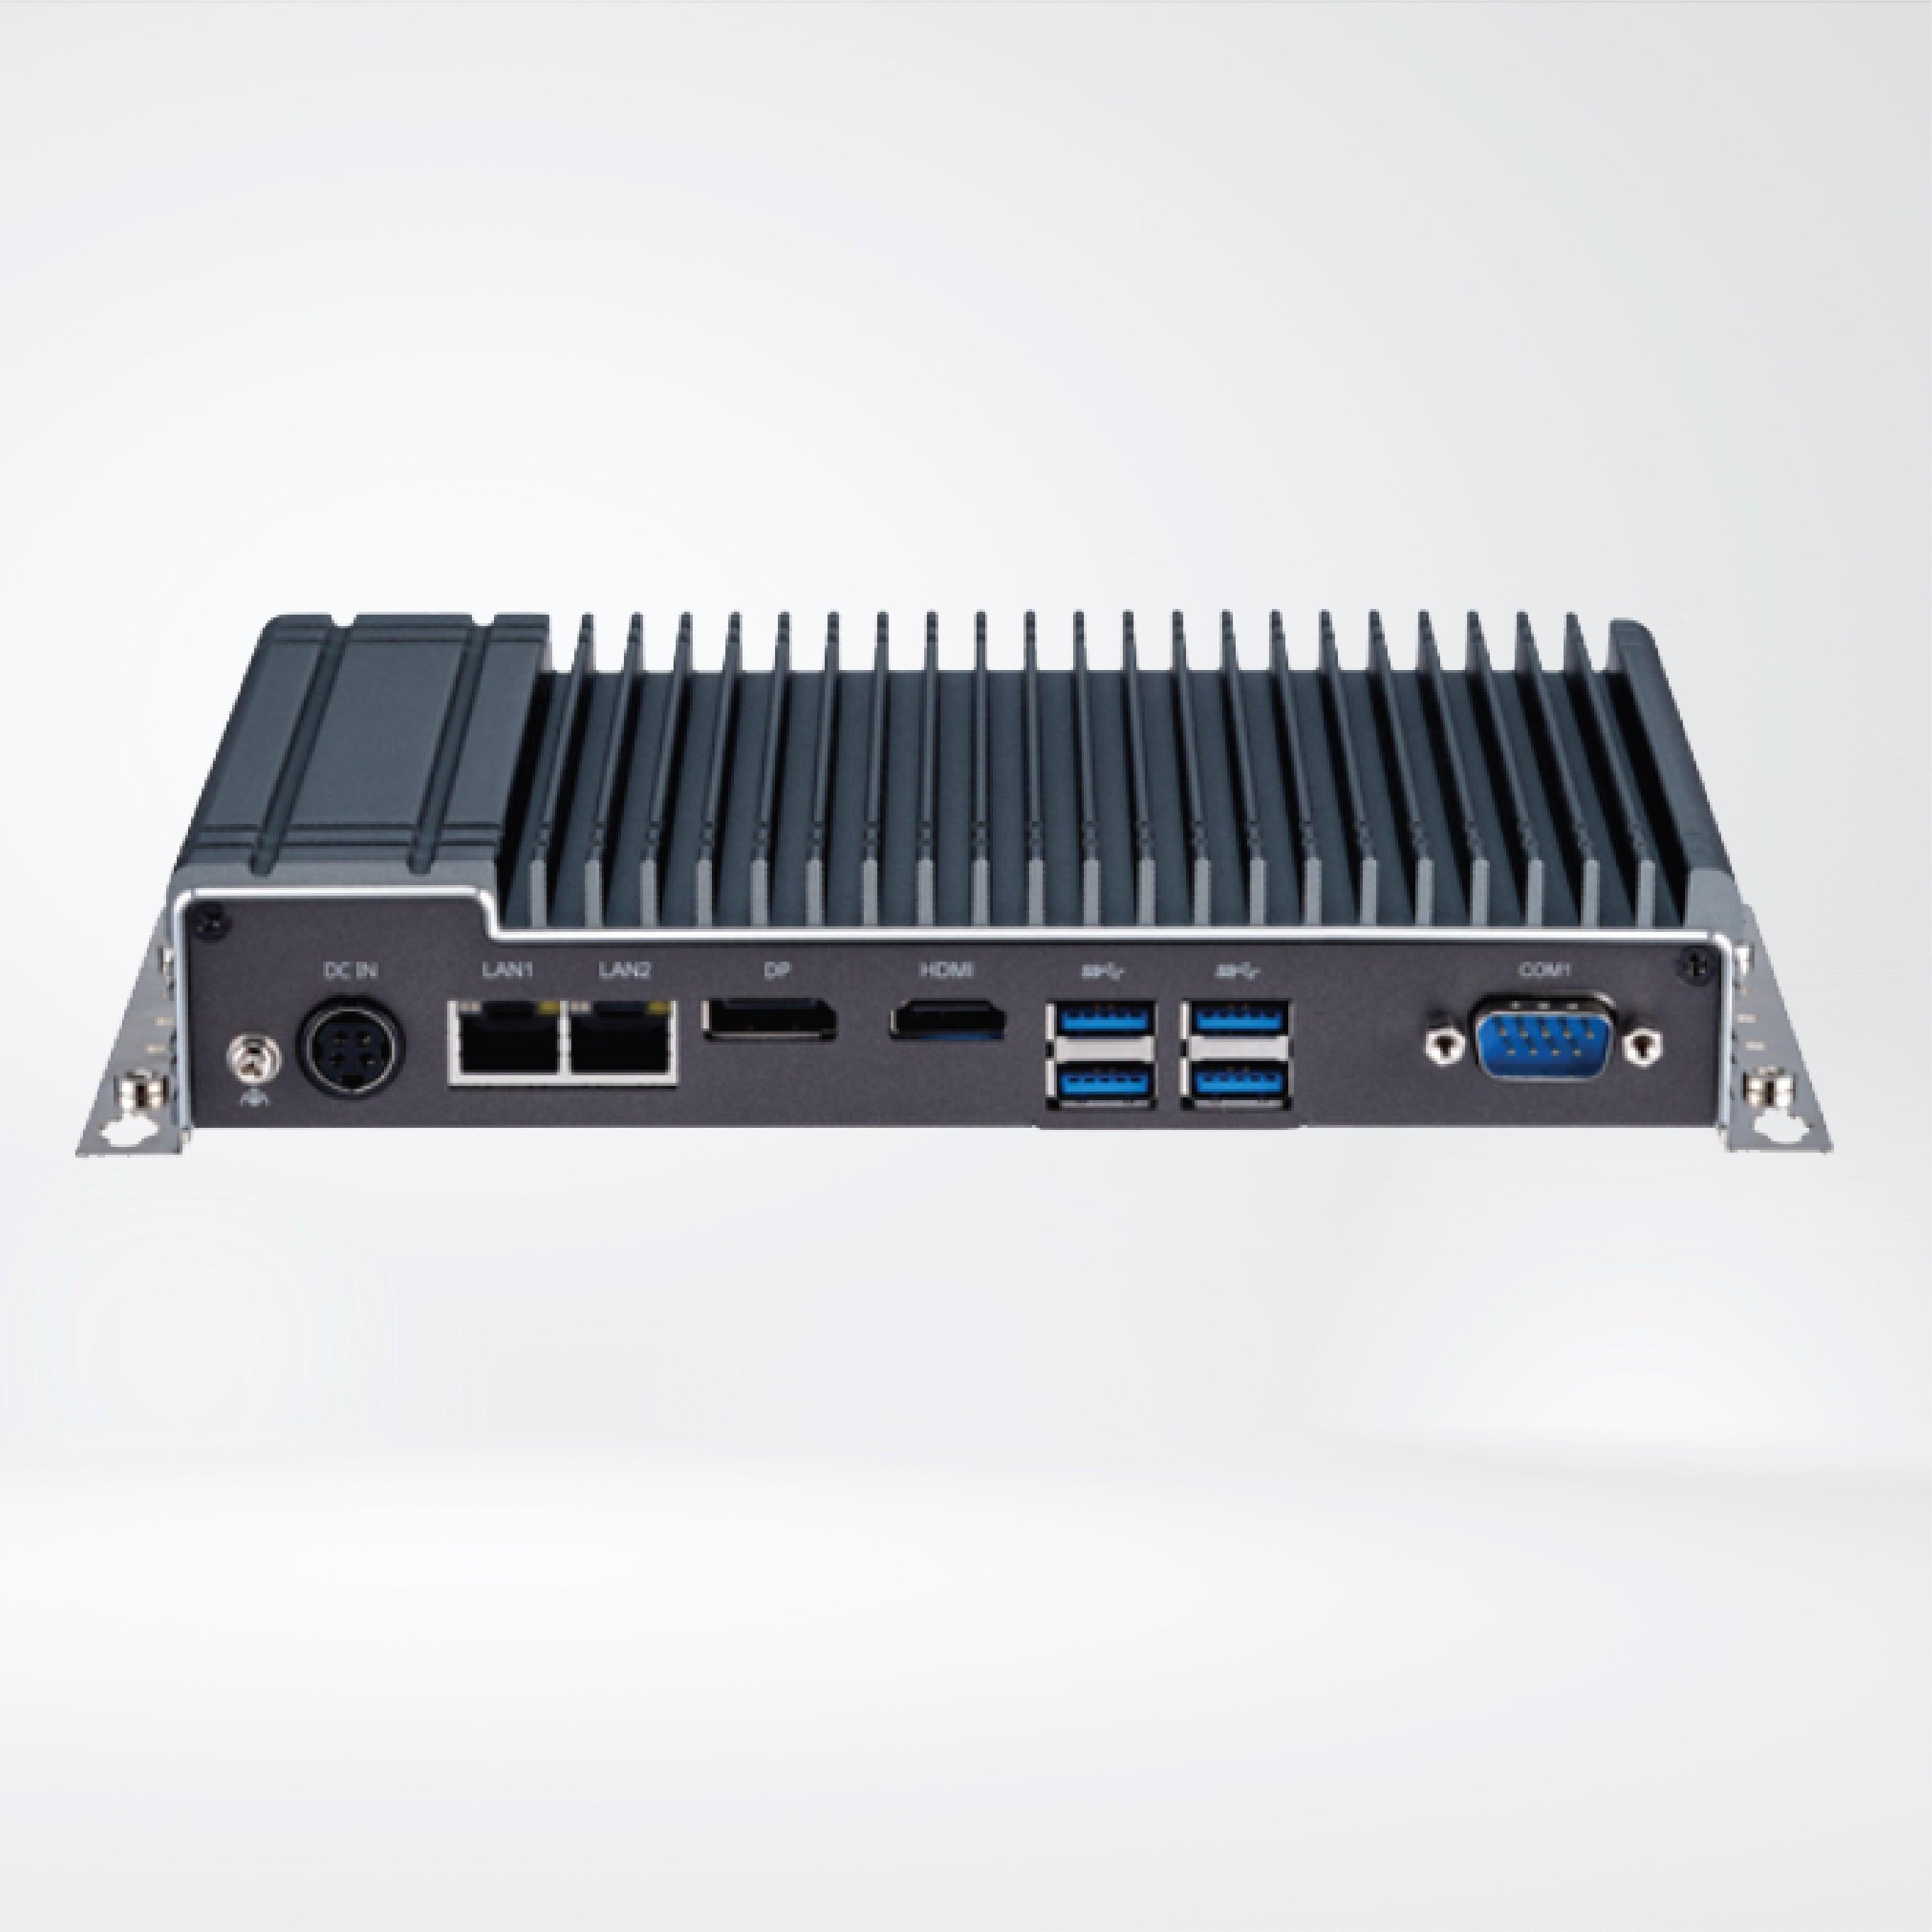 NDiS B360 Fanless Embedded Computer Powered by 11th Generation Intel® Core™ Processor - Riverplus